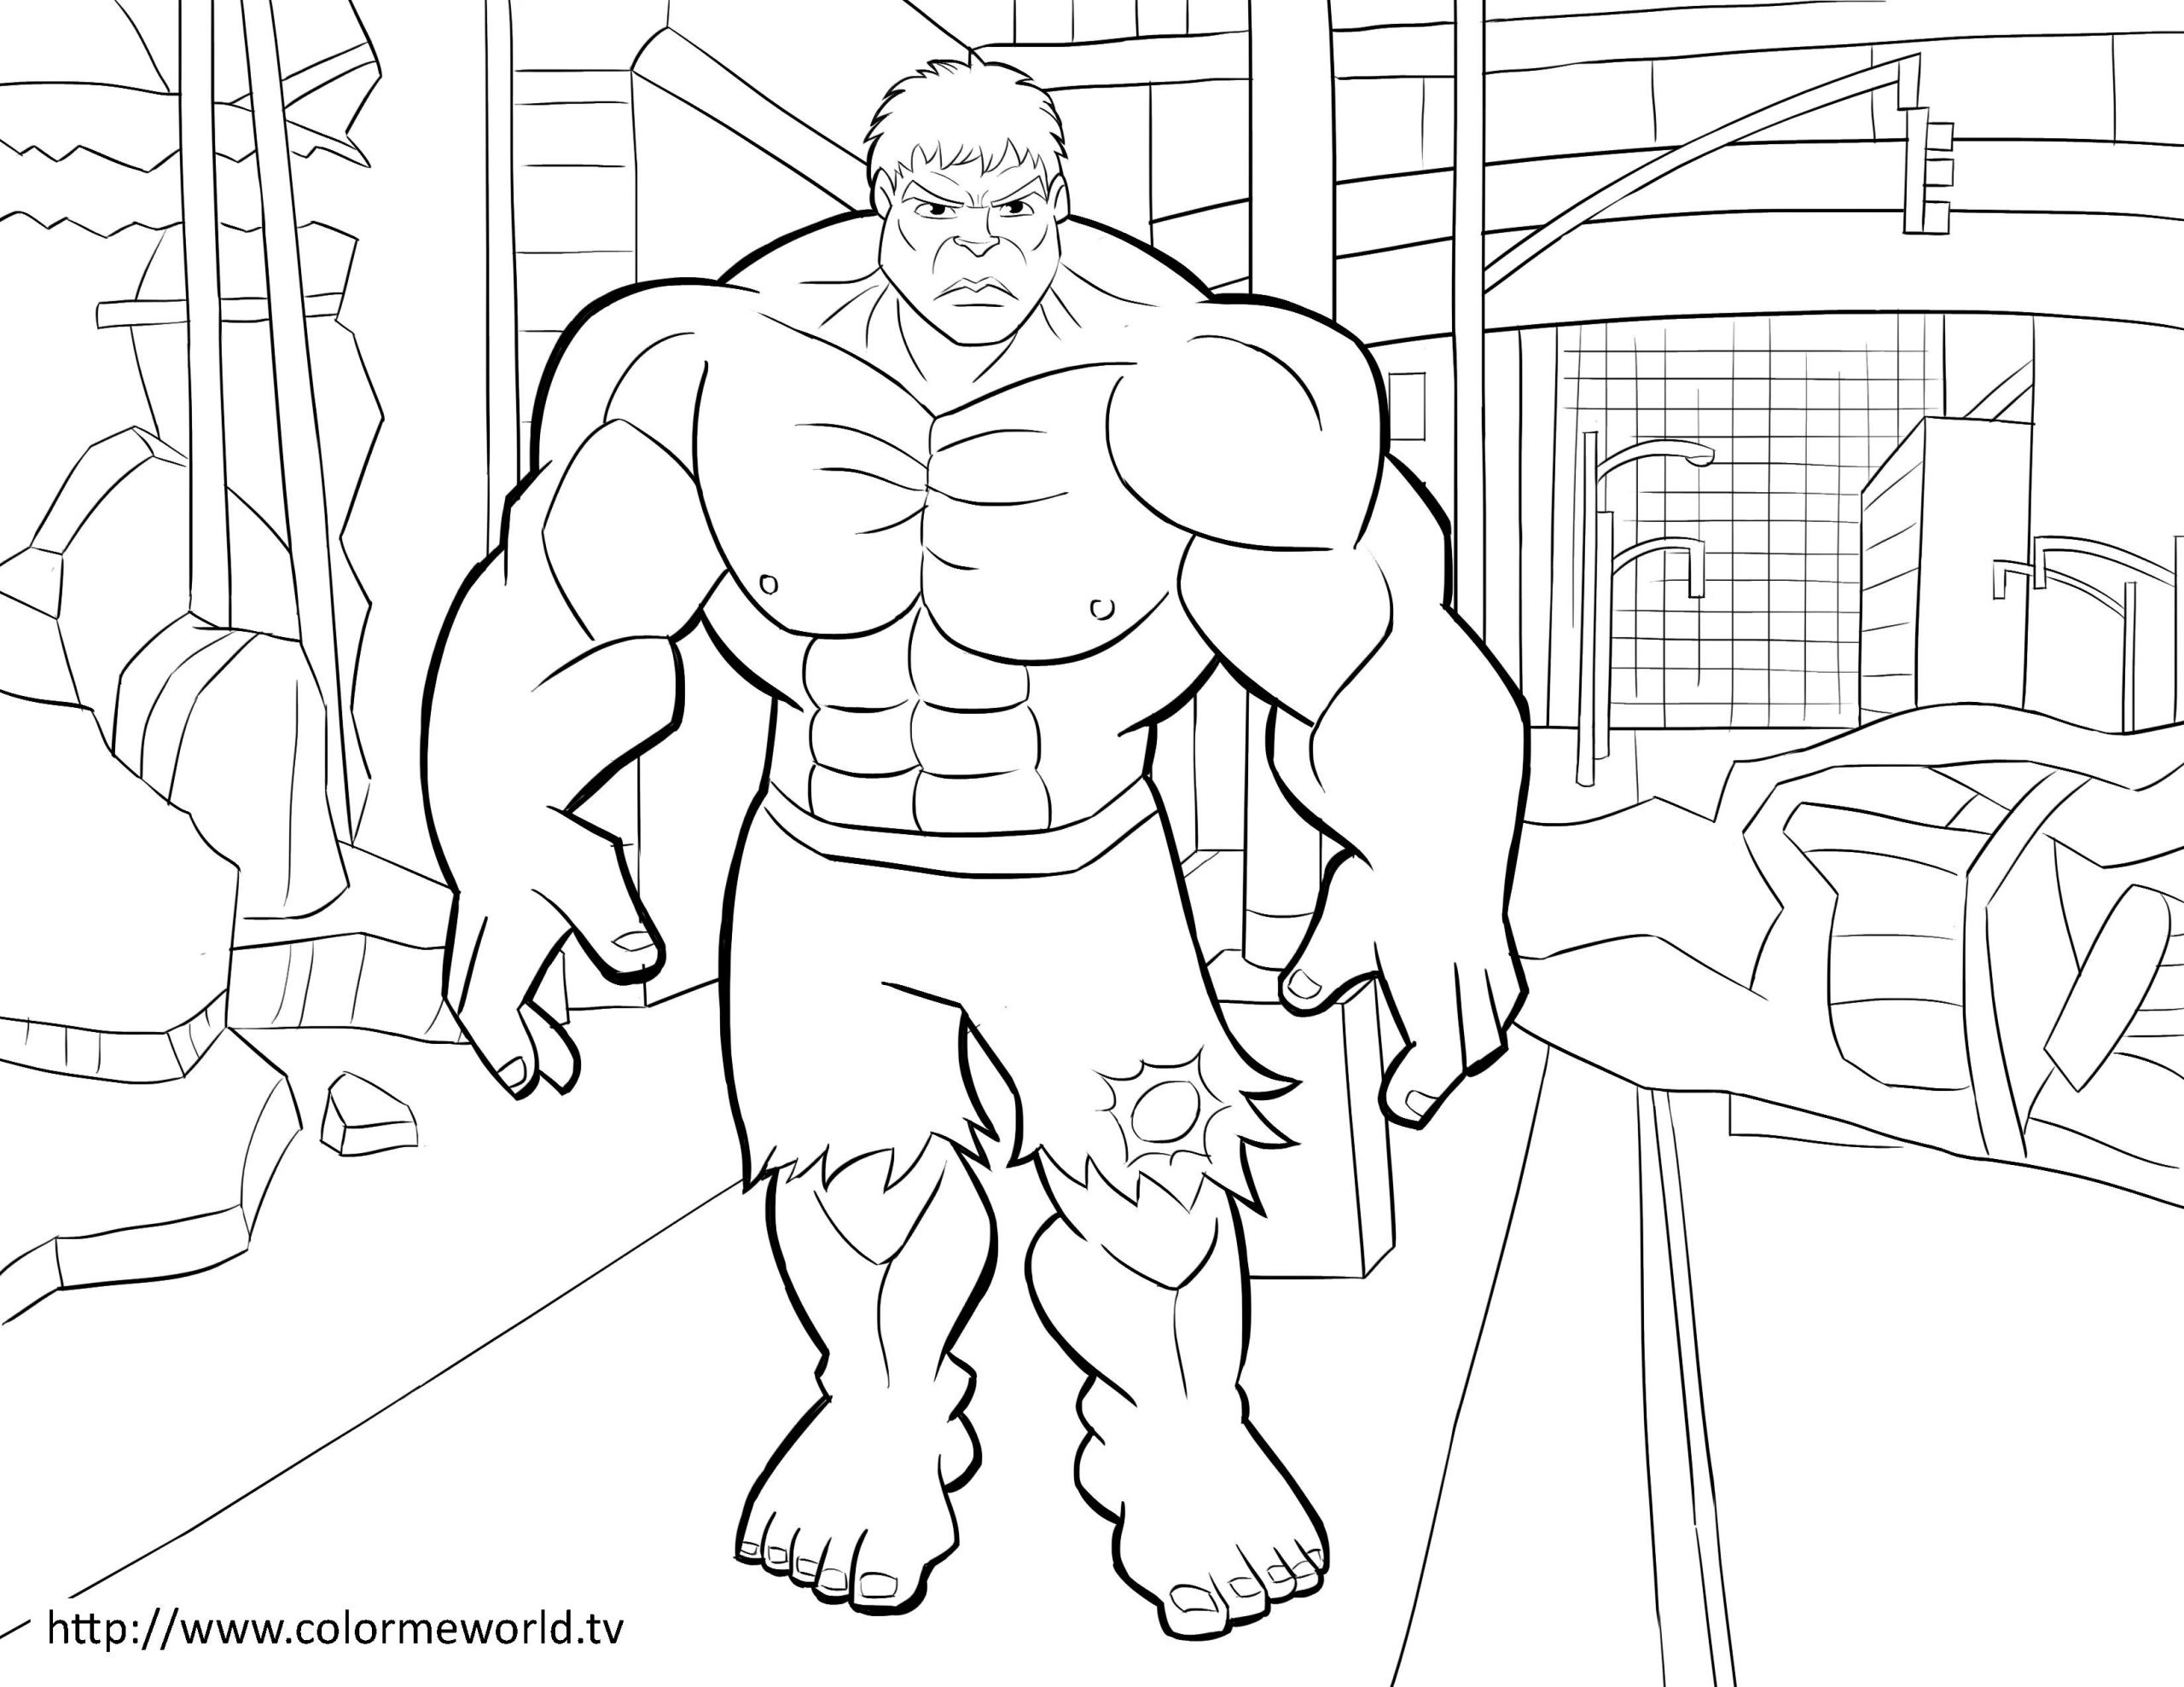 Coloring Pages For Kids Pdf
 Marvel Coloring Pages Free Printable Marvel PDF Coloring